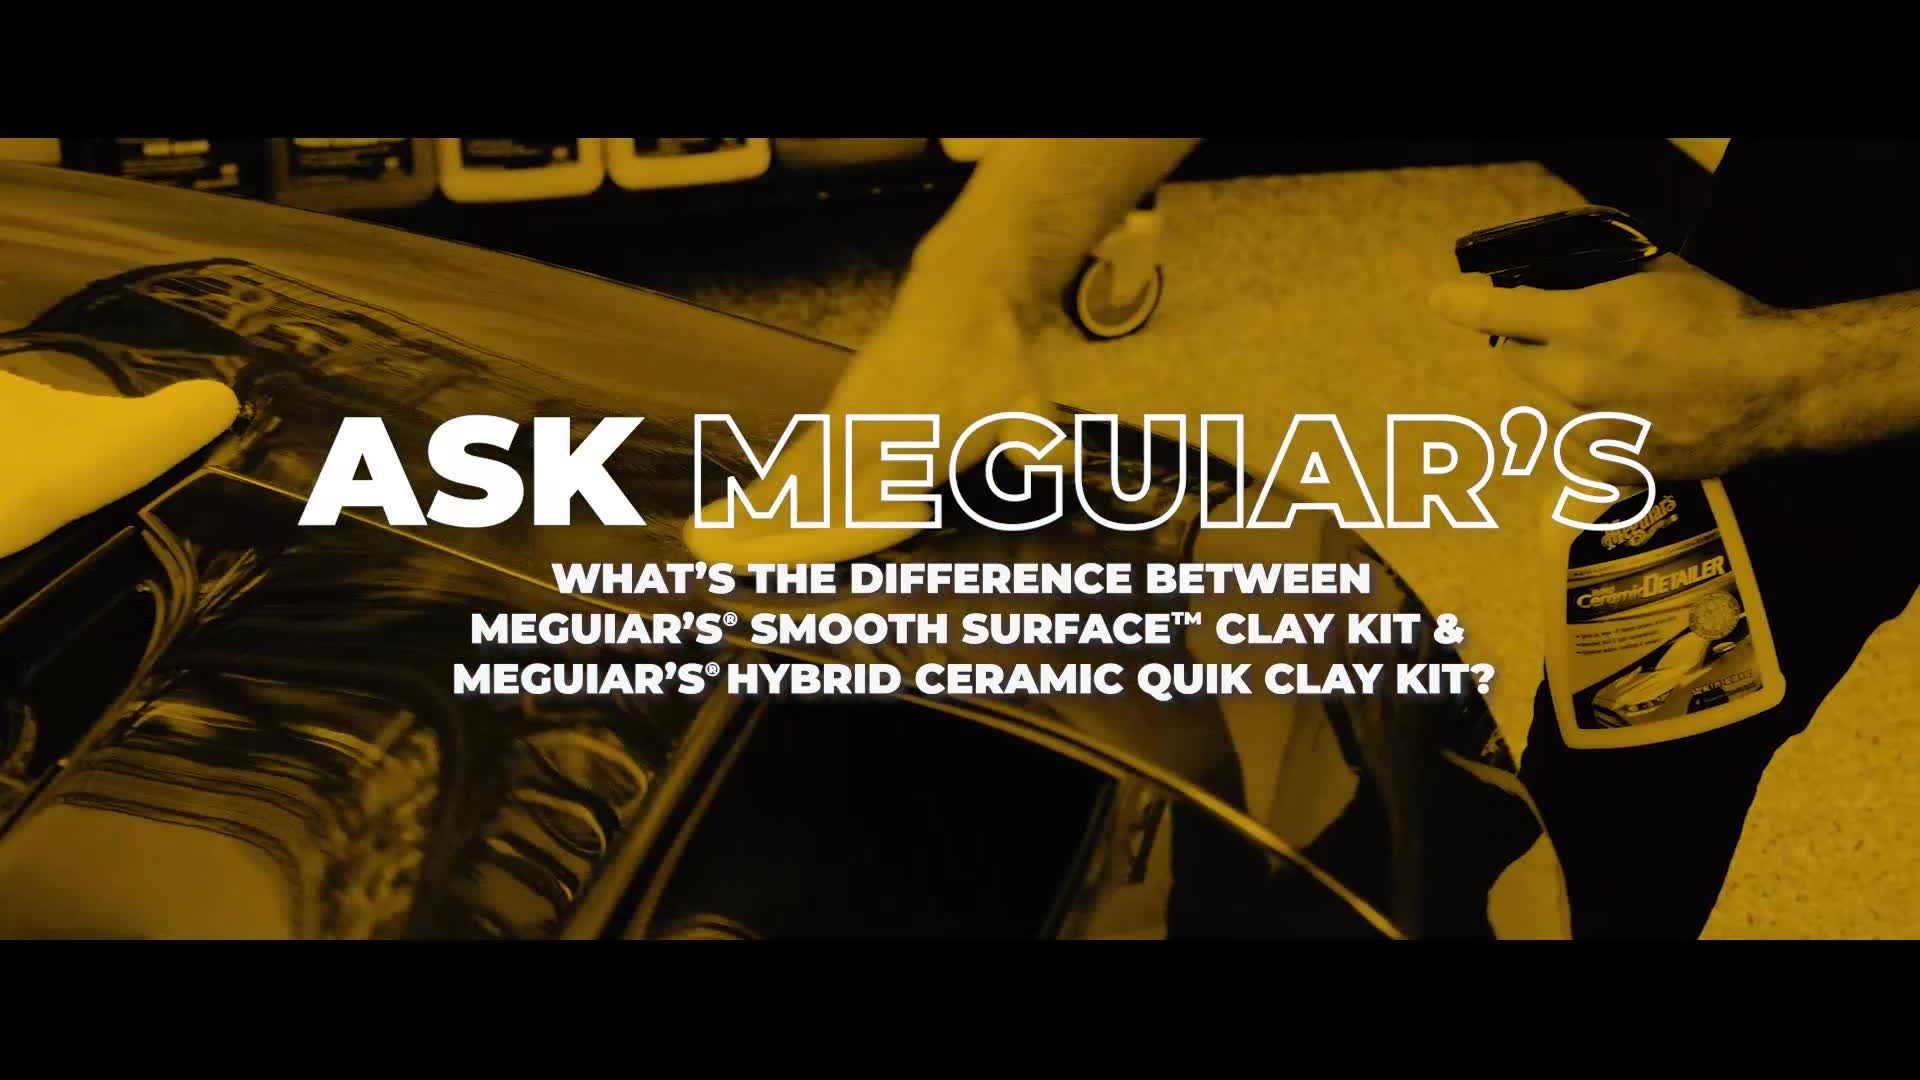 Meguiar’s Smooth Surface Clay Kit vs Meguiar’s Hybrid Ceramic Quik Clay Kit Meguiar’s Smooth Surface Clay Kit makes use of our traditional clay and our Quik Detailer Mist & Wipe as the lubricant spray to do a great job of removing above surface bonded contaminants. 

Our Meguiar’s Hybrid Ceramic Quik Clay Kit takes that process and introduces new technology. It comes with a reusable Synthetic Clay Pad that can be rinsed off and used multiple times coupled with a spray lubricant that’s enhanced with Si02 technology to provide some added protection after you’ve removed those bonded contaminants. 

With either clay kit, the process of claying the paint is something that anyone can easily do without swirling or scratching the paint.